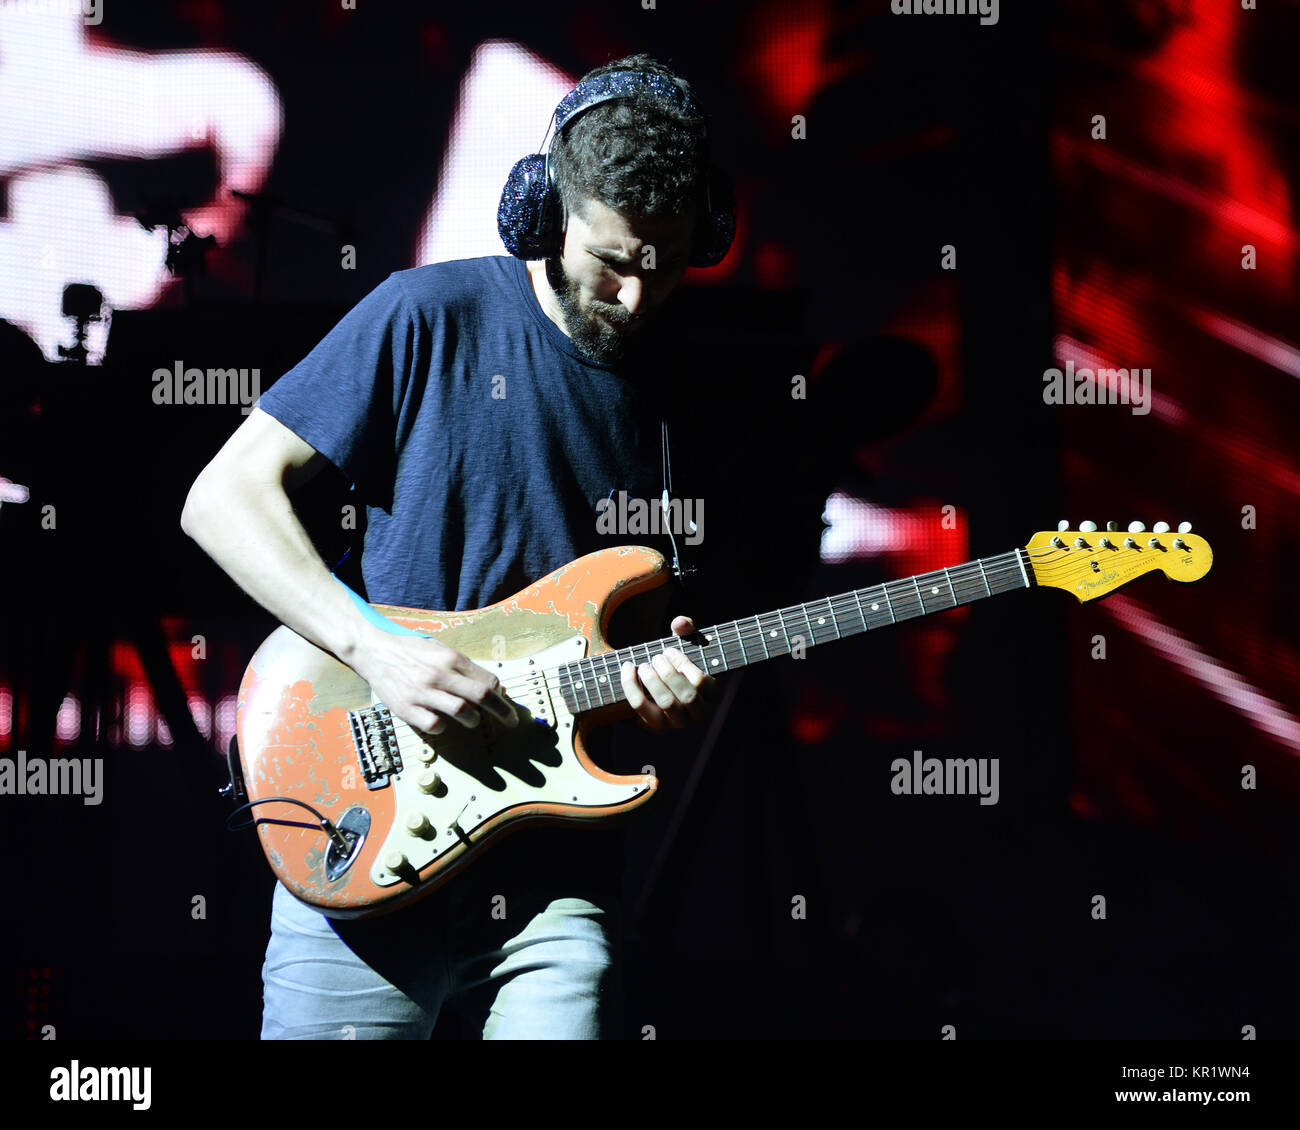 WEST PALM BEACH - AUGUST 8:  Brad Delson of Linkin Park perform at the Cruzan Amphitheatre on August 8, 2014 in West Palm Beach, Florida  People:  Brad Delson Stock Photo